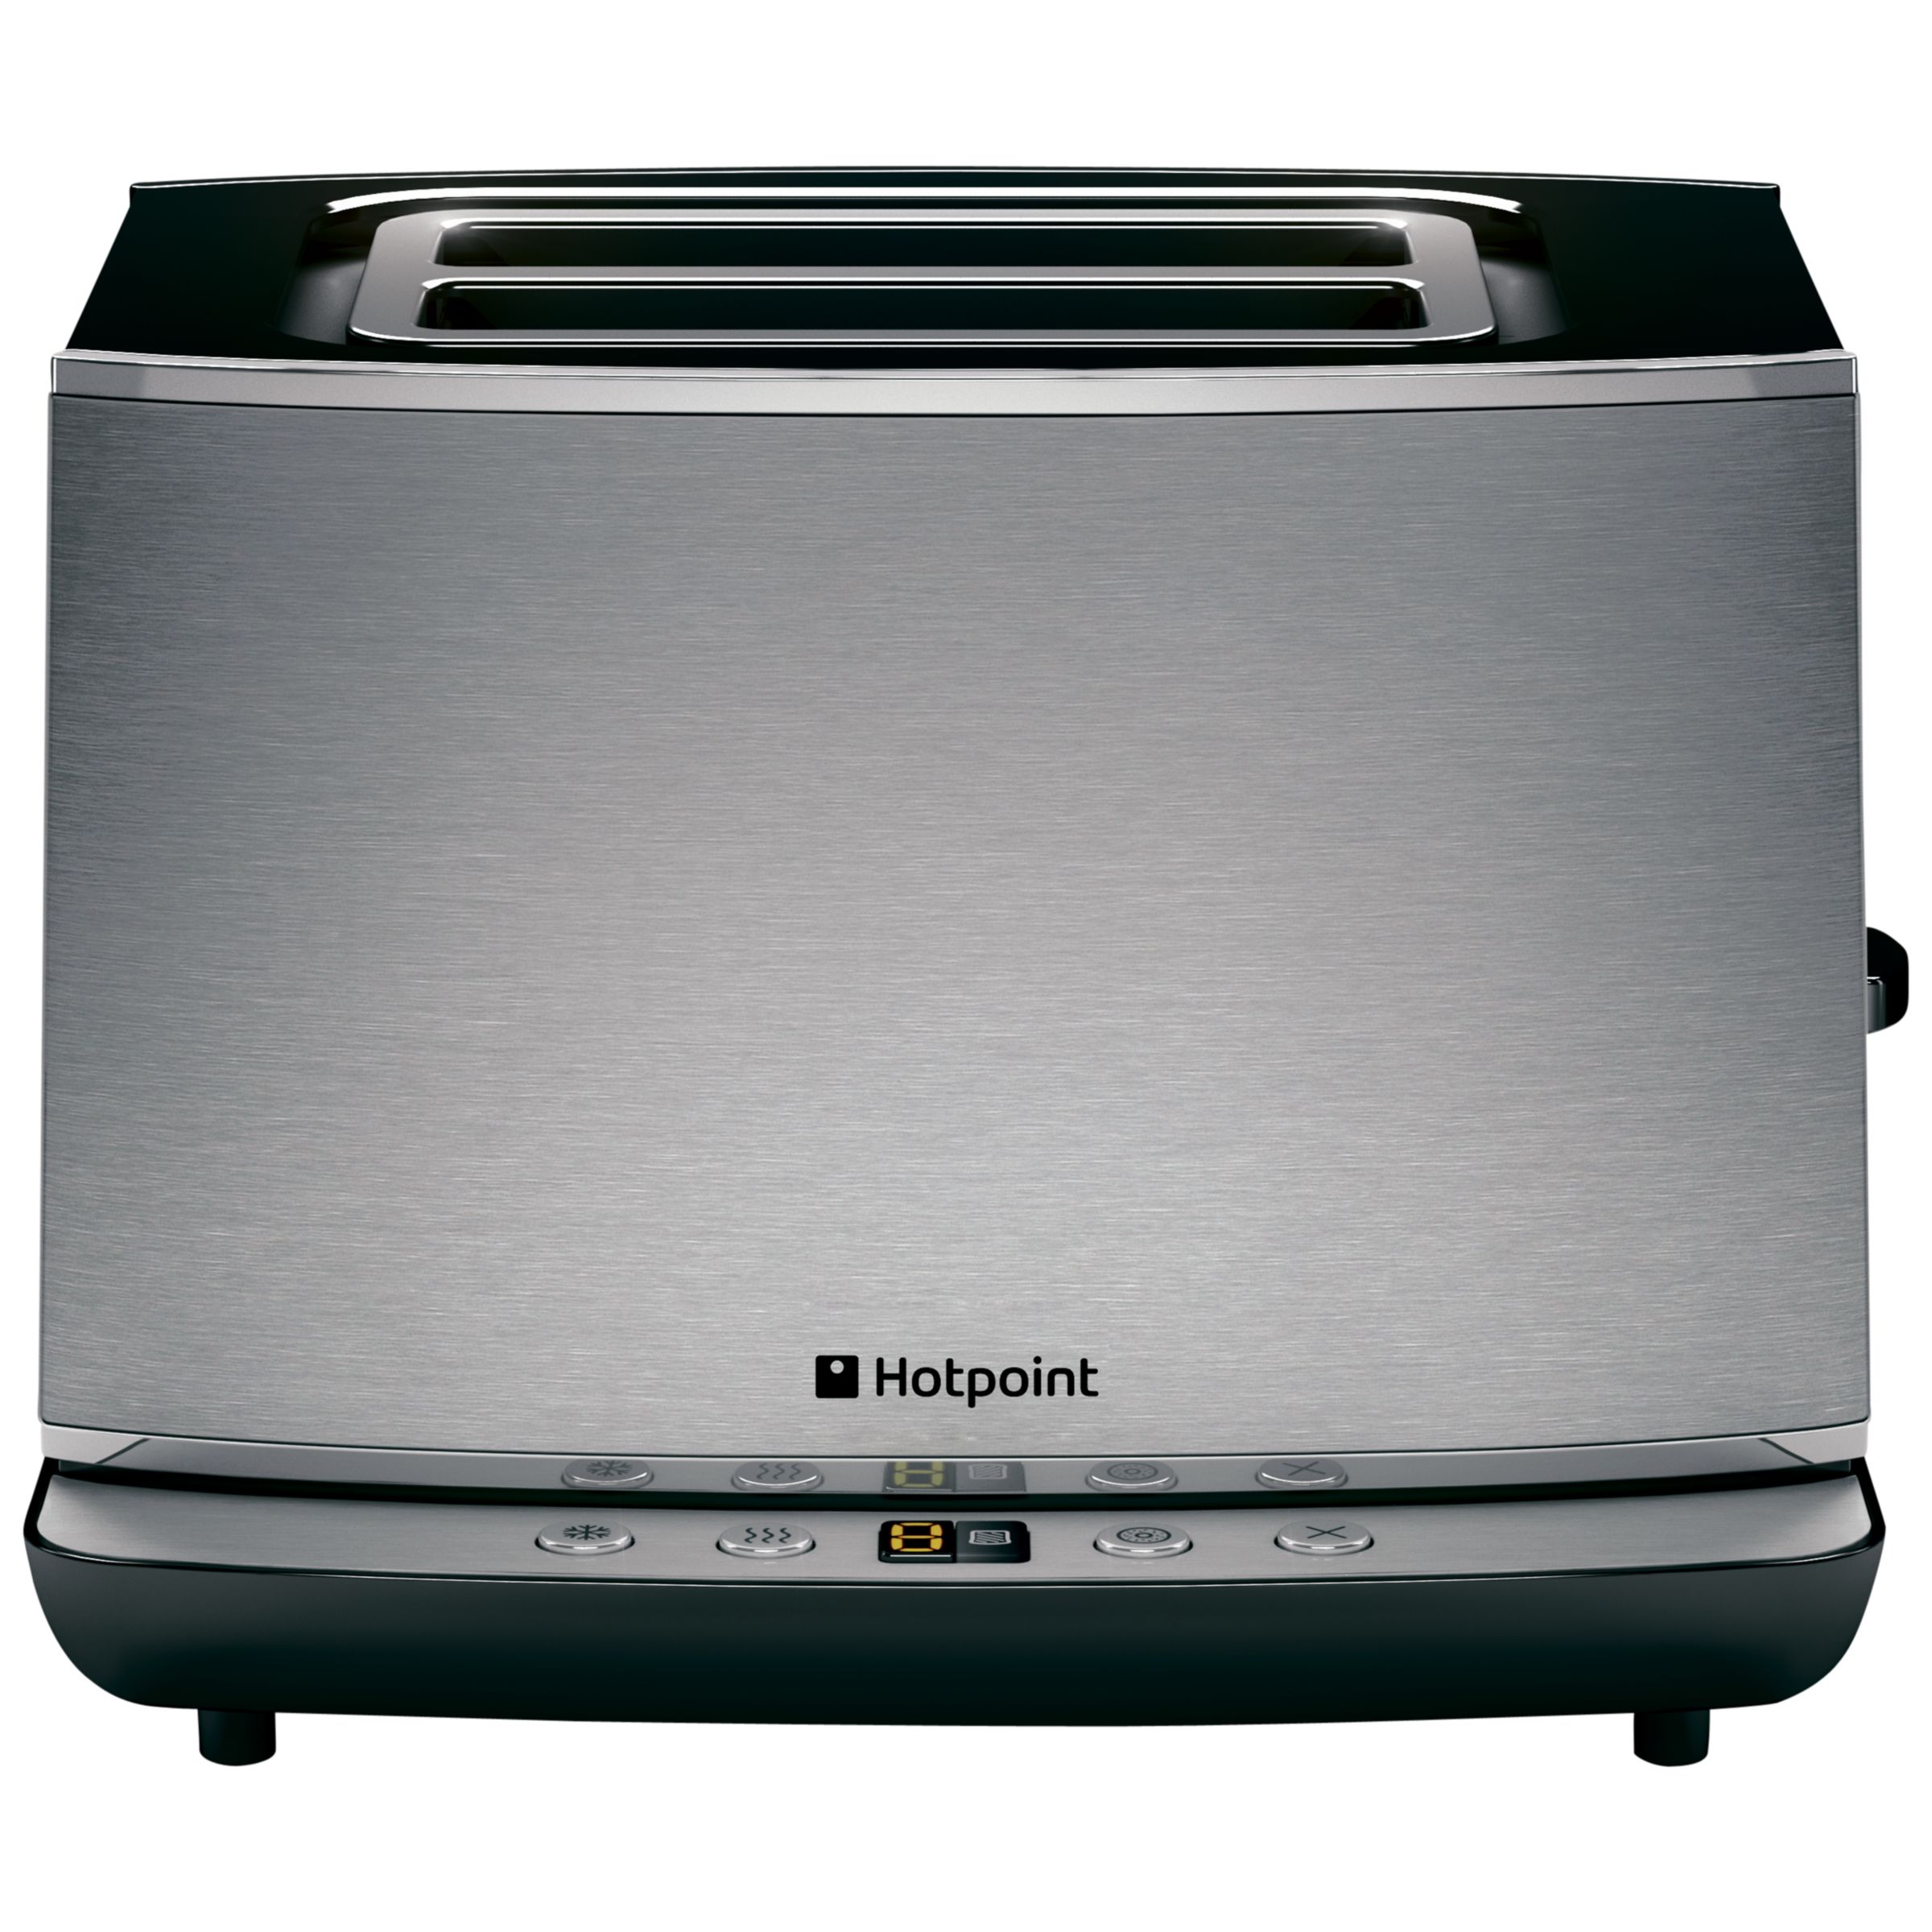 Shop Hotpoint Toasters up to 70% Off | DealDoodle